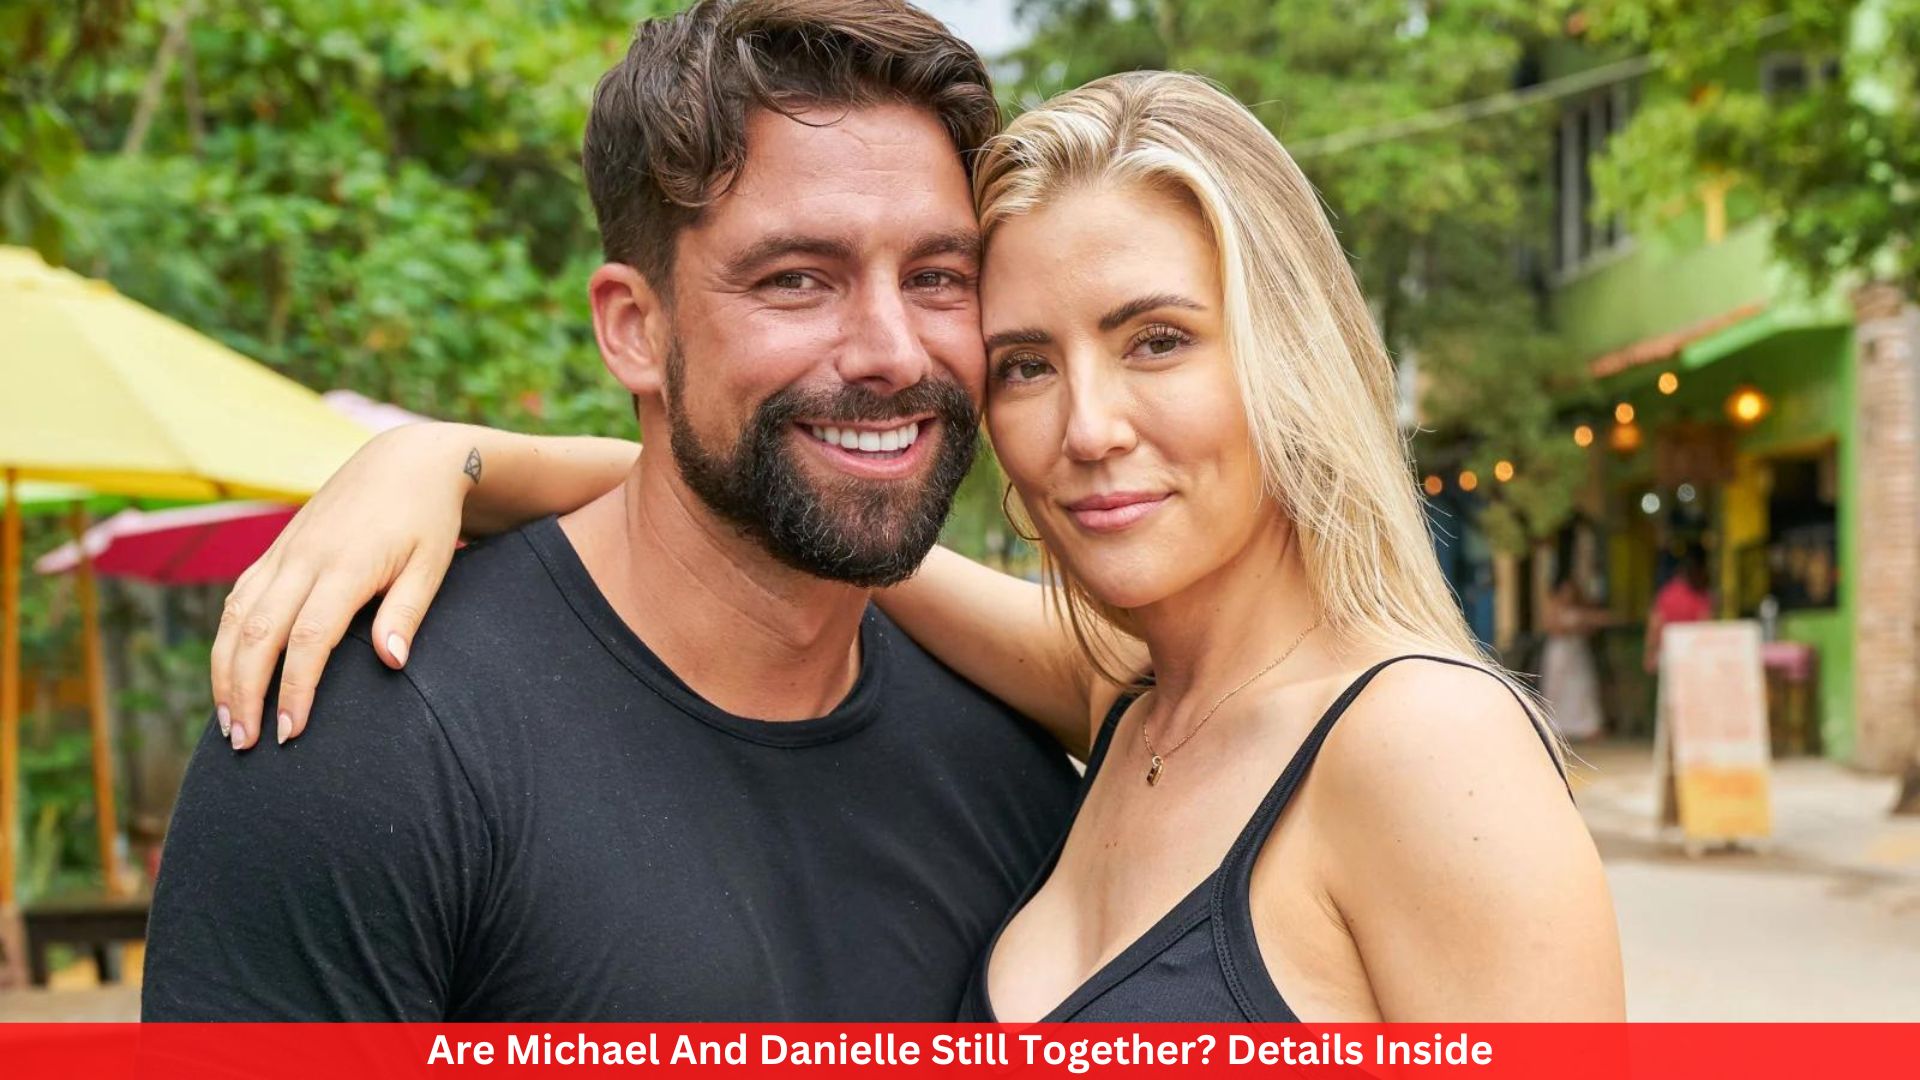 Are Michael And Danielle Still Together? Details Inside